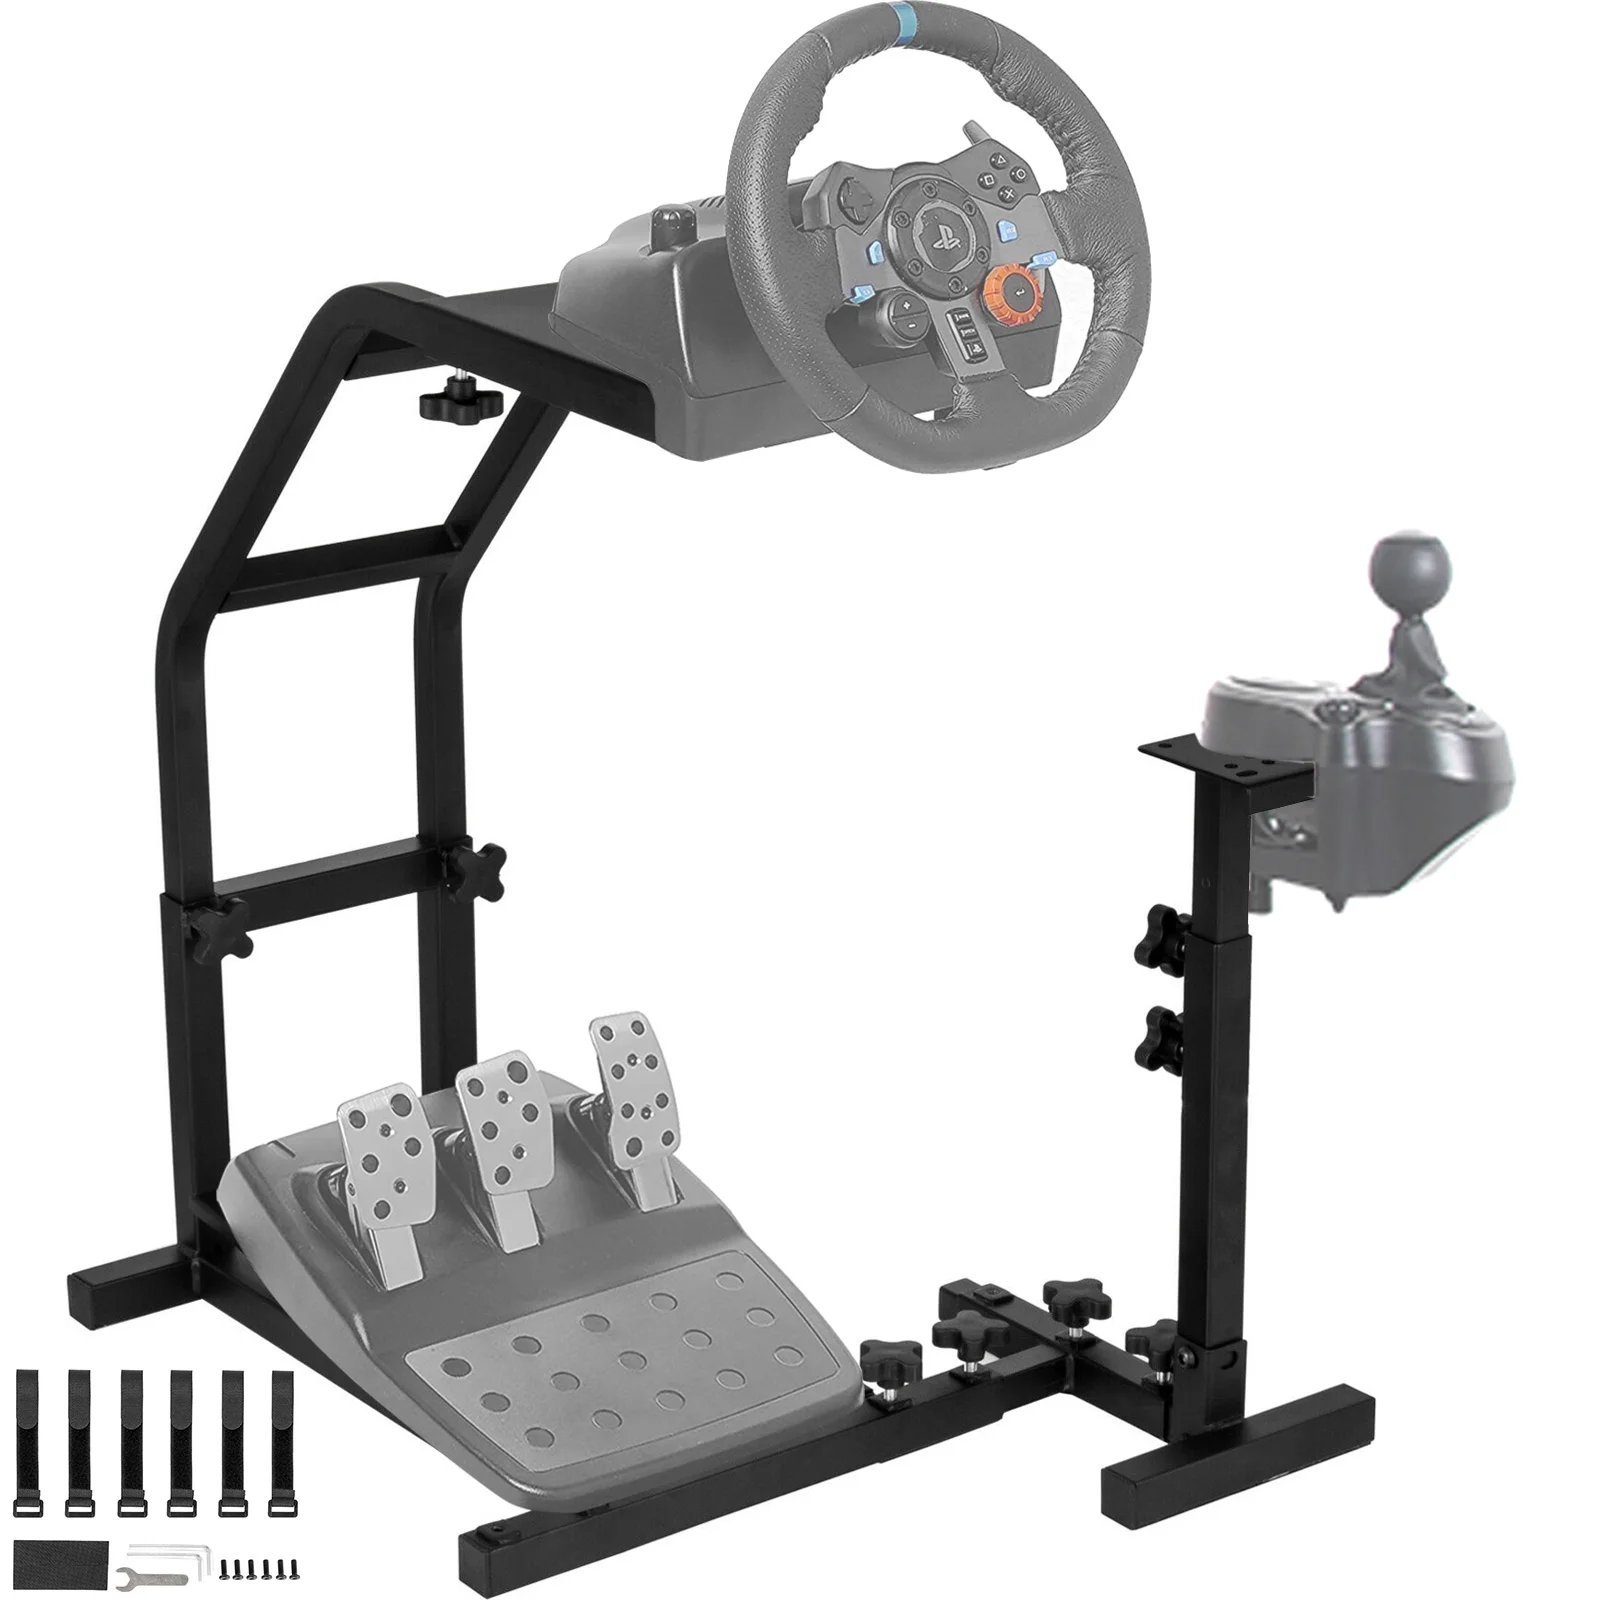 

Factory Racing Simulator Steering Wheel Stand for Logitech G29 G27 and G25 racing wheel stand ps4